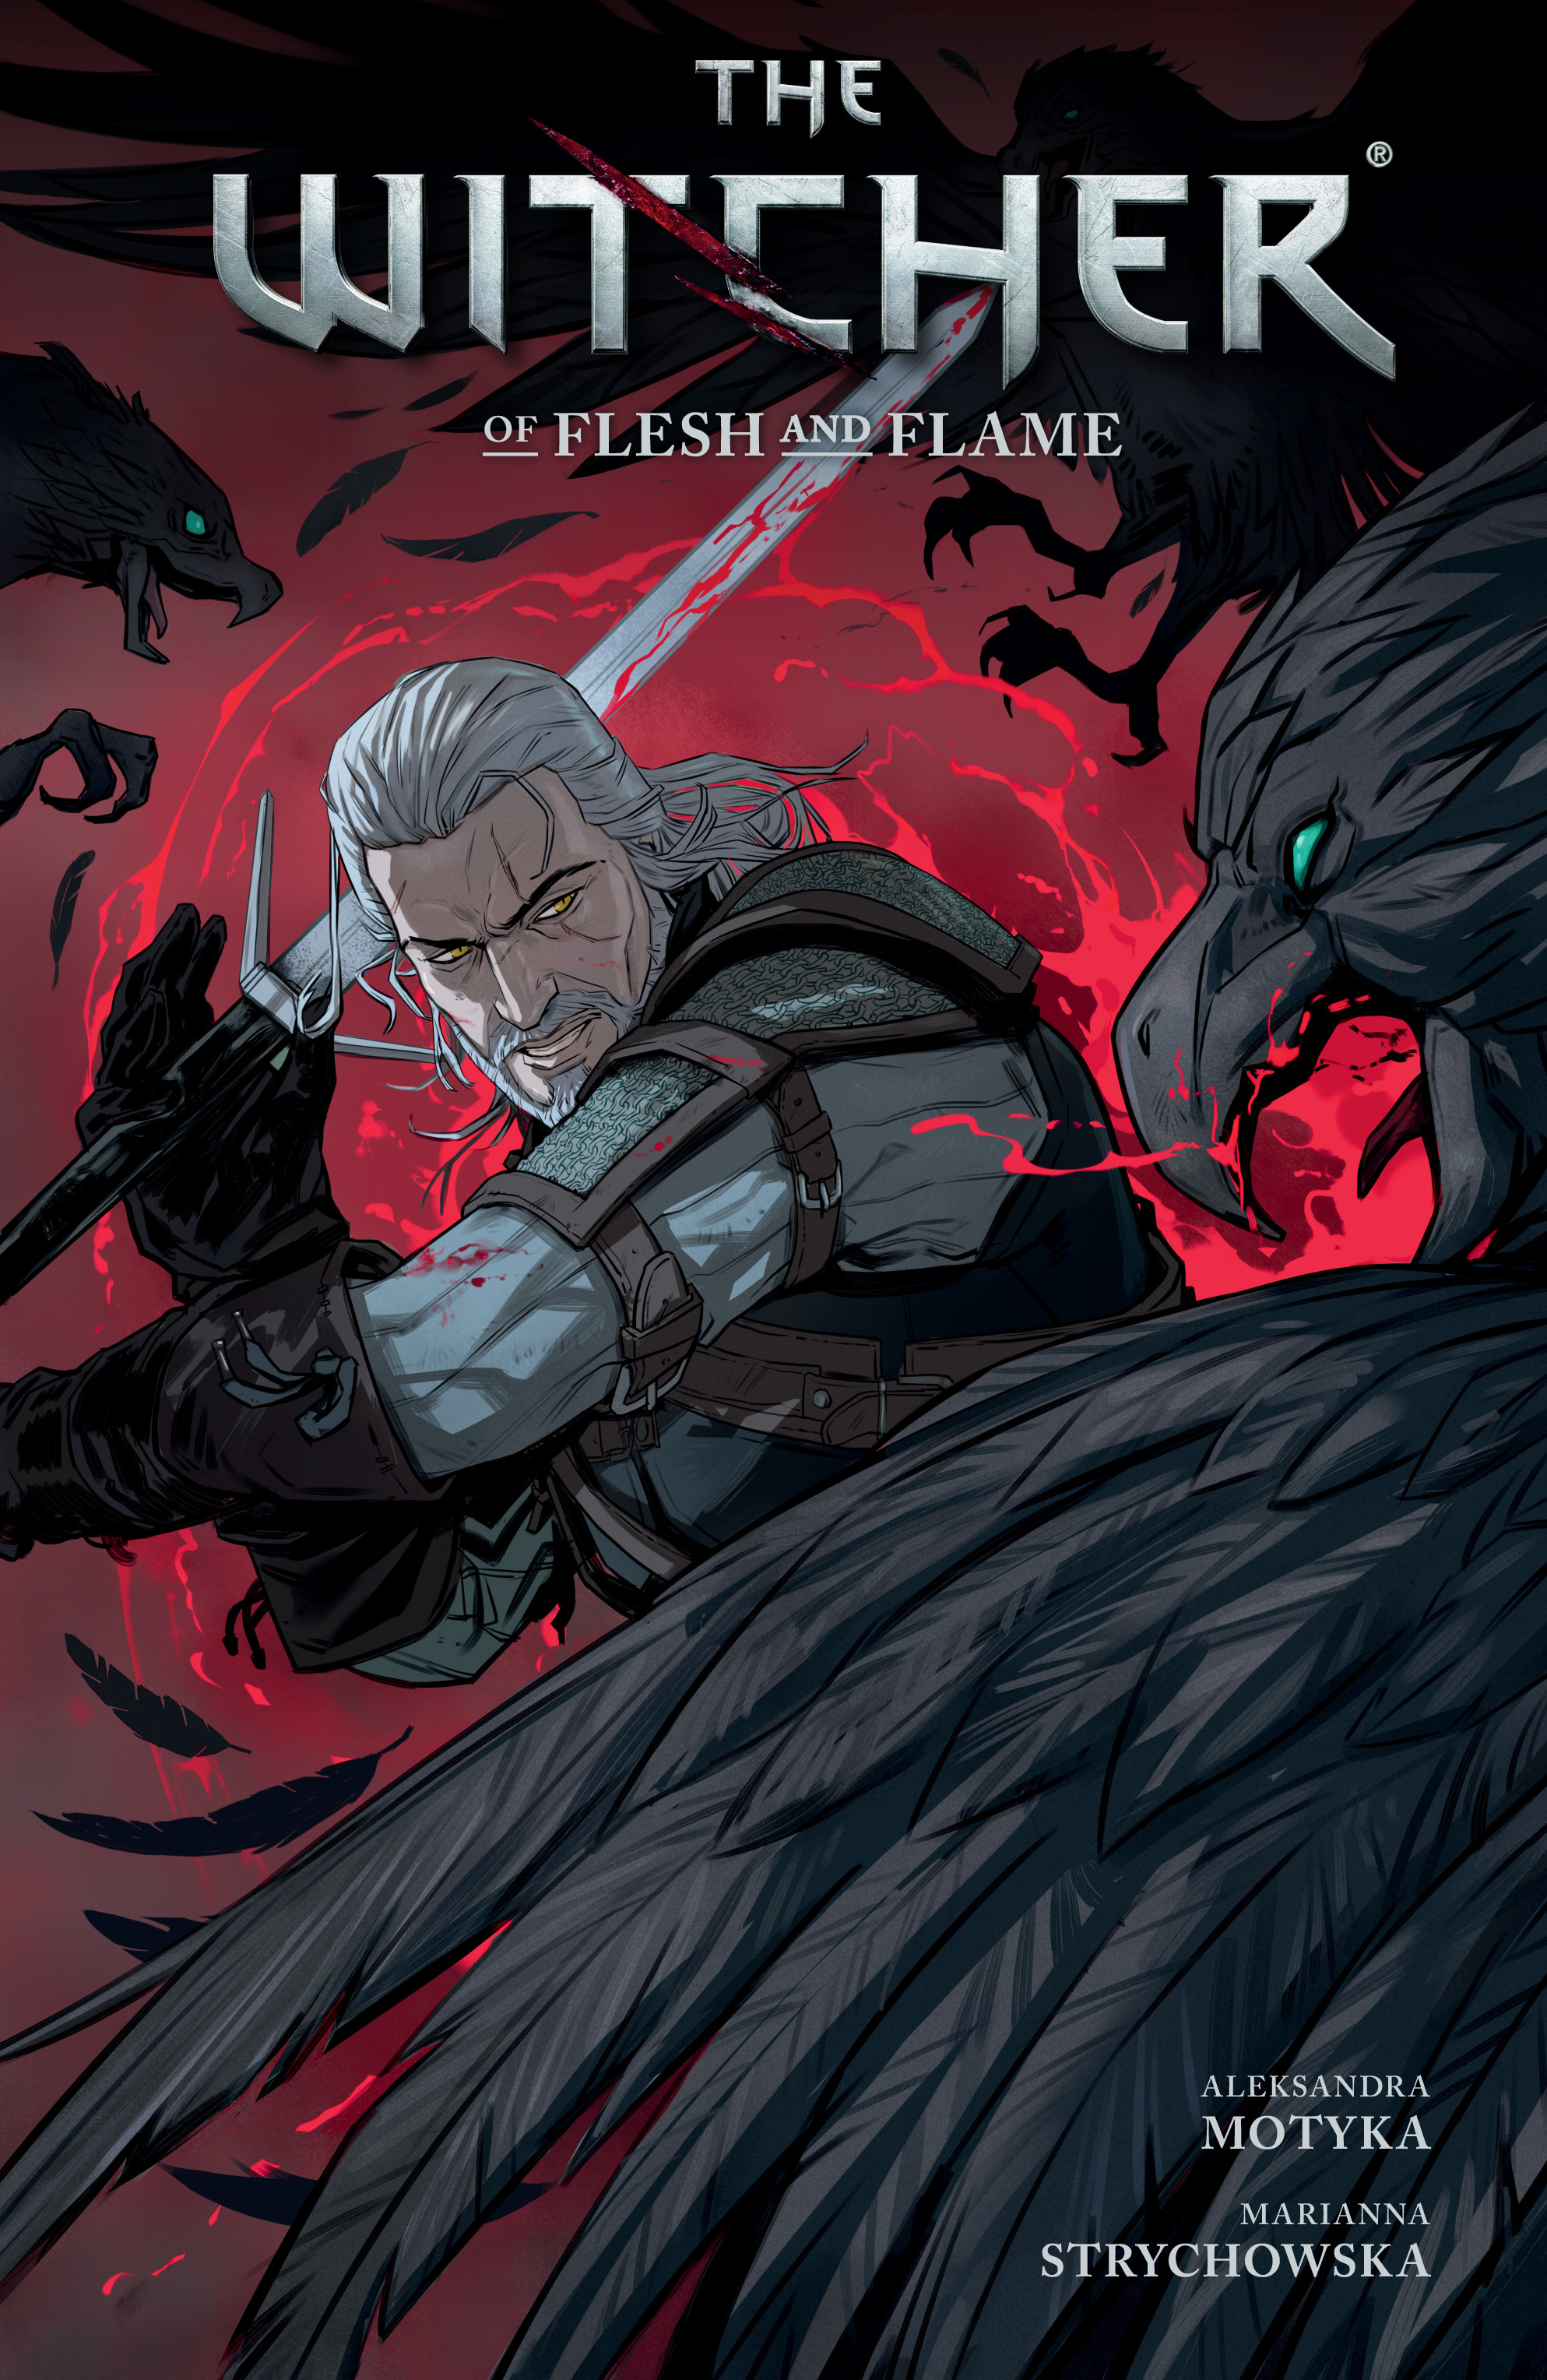 The Witcher: Of Flesh and Flame TPB Page 1. Home. 